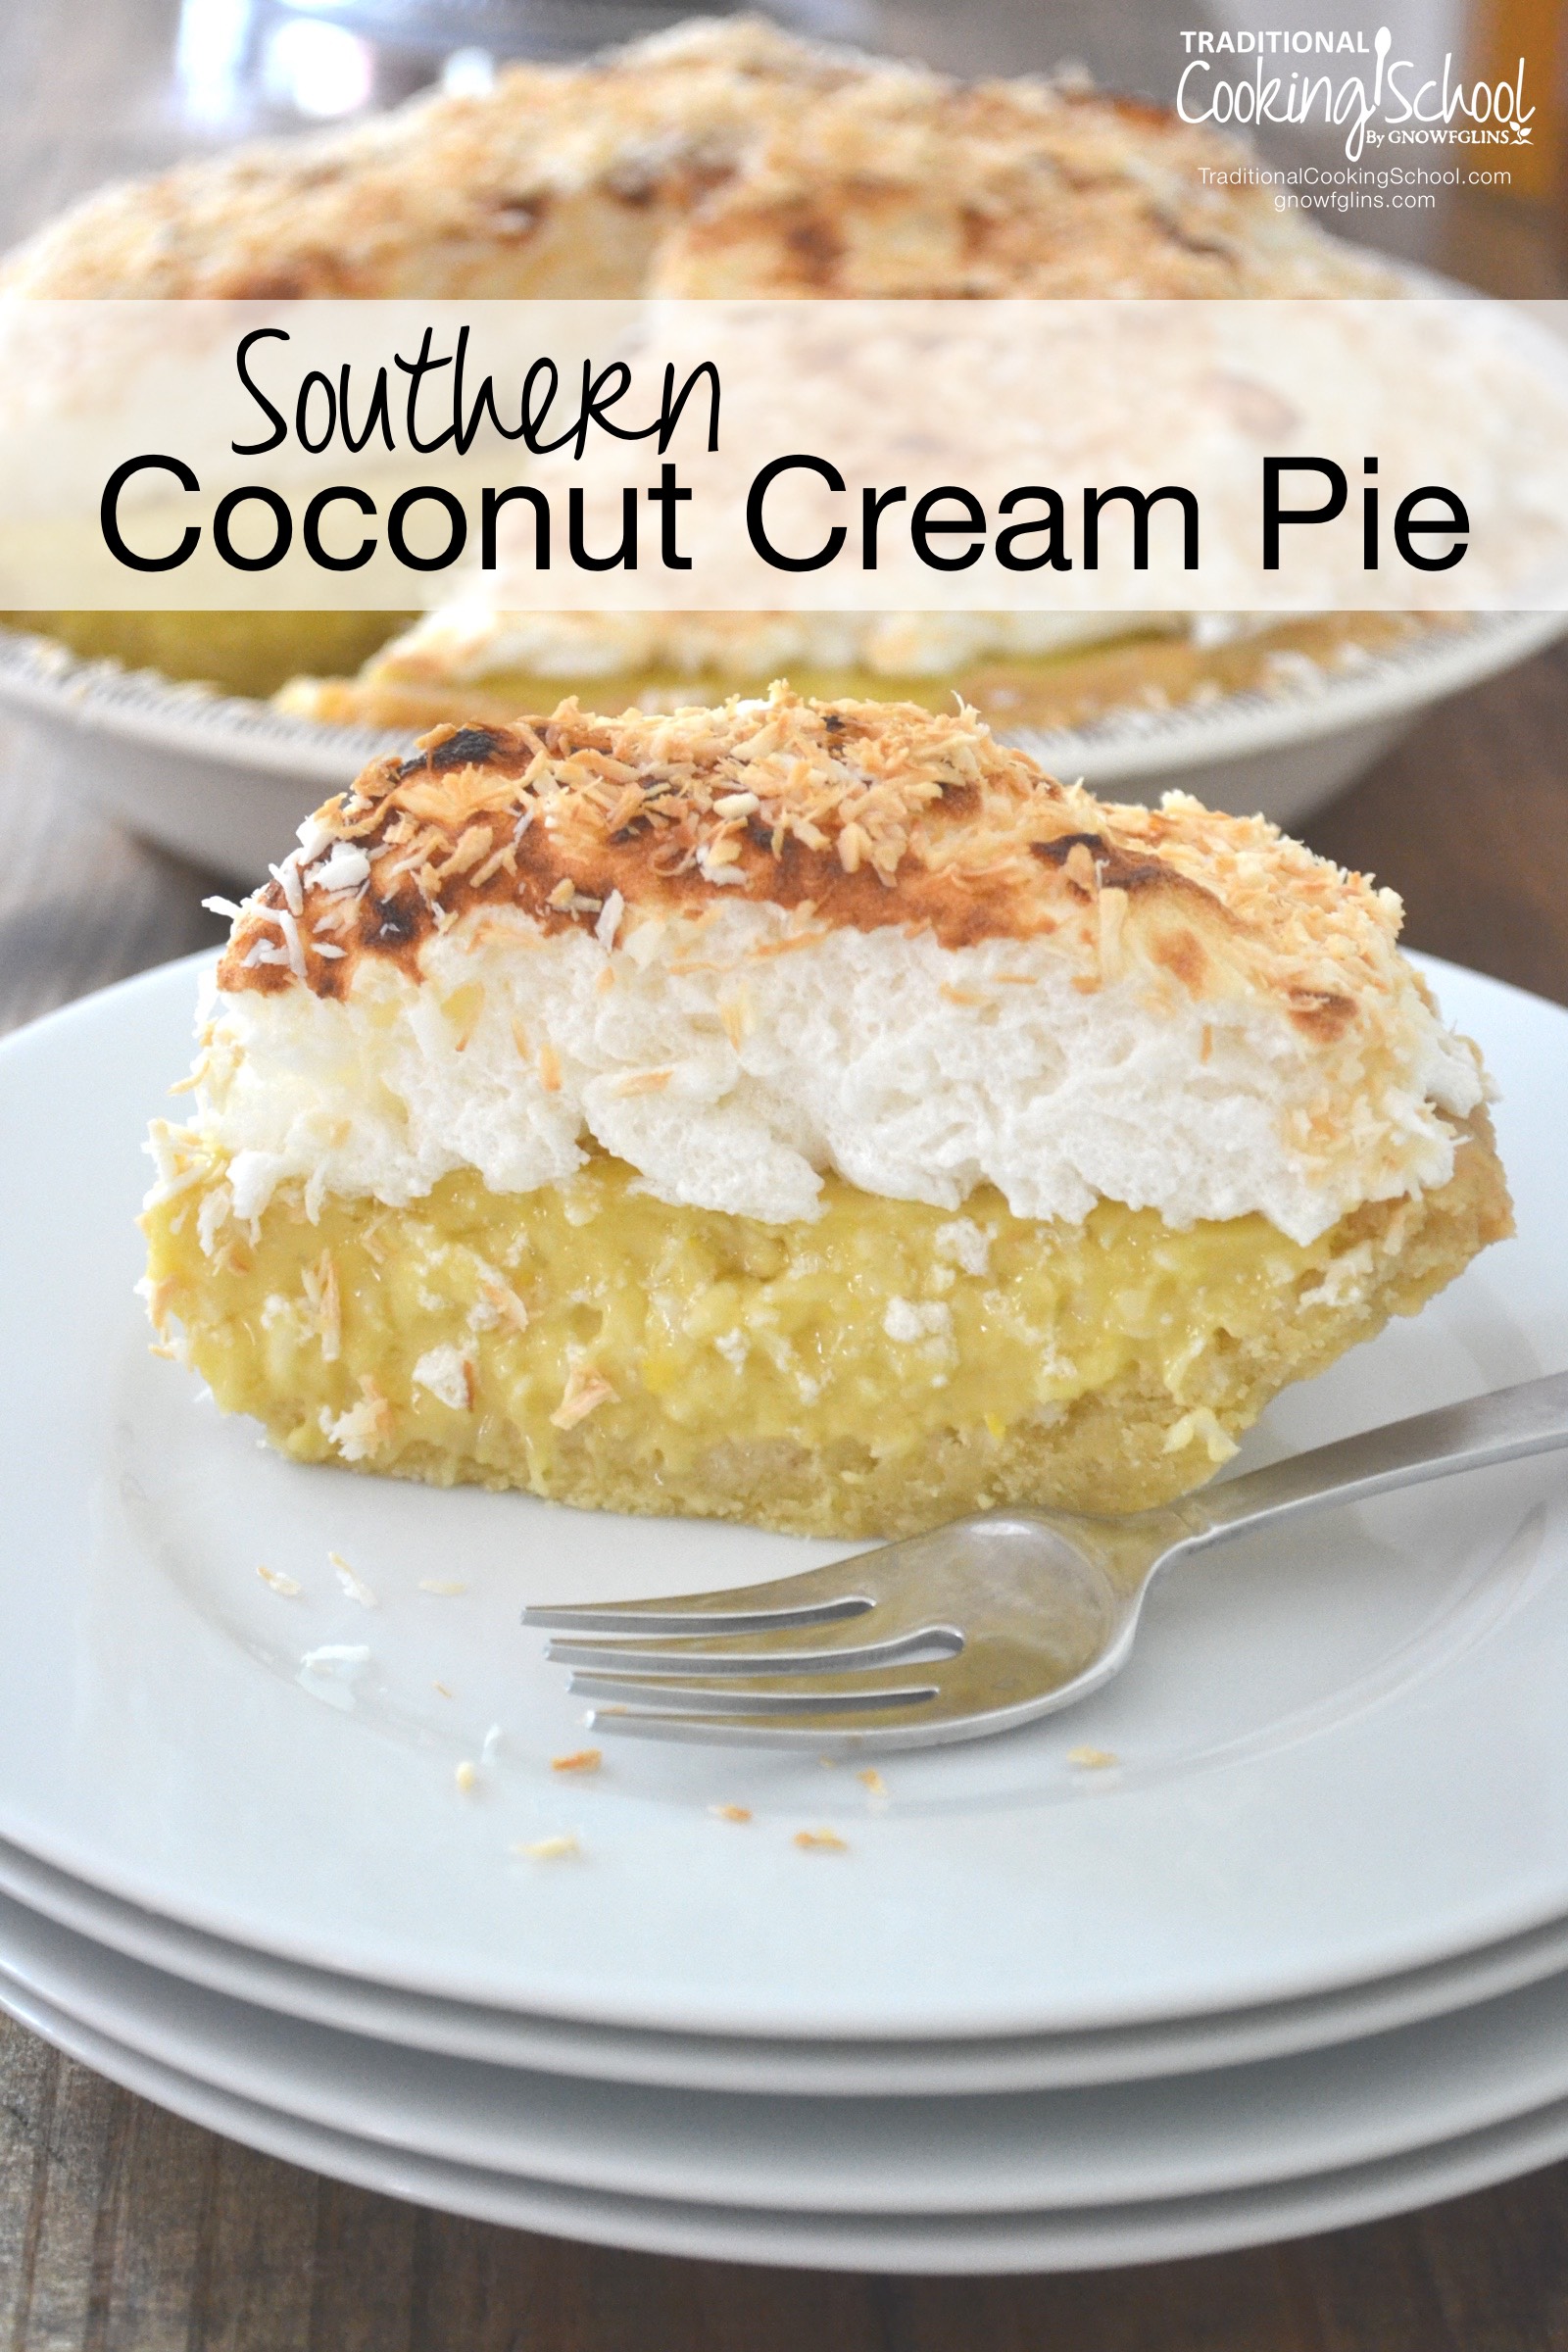 Southern Coconut Cream Pie | My husband's absolute favorite dessert is... coconut cream pie. For his birthday, I considered overnighting his favorite from Tina's in New Mexico. I snapped back to reality and made one instead. THIS coconut cream pie has nothing to hide -- no white flour, refined sugar, boxed pudding, or margarine. | TraditionalCookingSchool.com